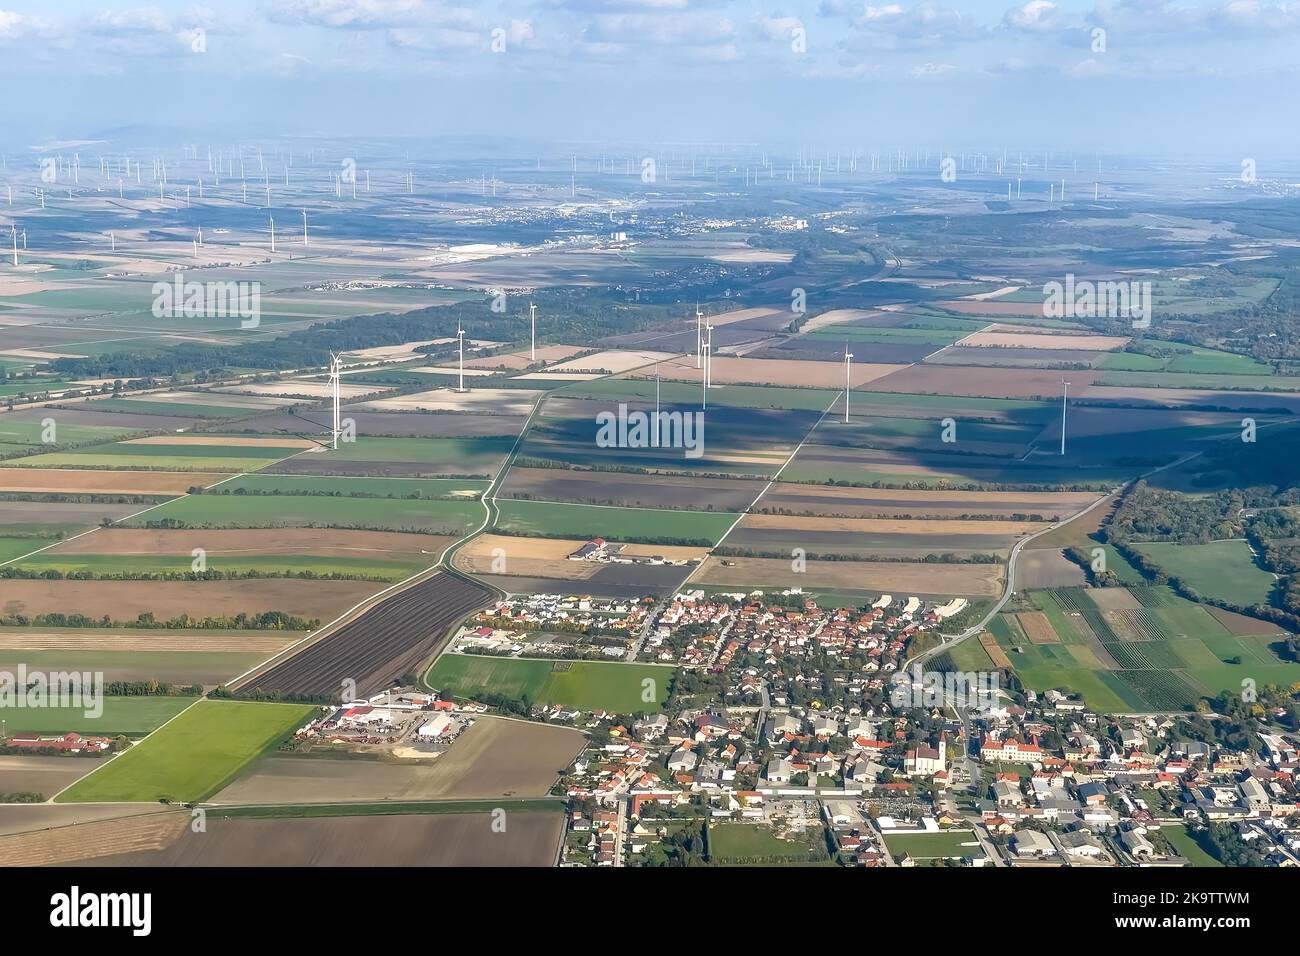 Aerial photograph showing distance from wind turbines on agricultural land to built-up area, Marktgemeinde Sommerein, Lower Austria, Austria Stock Photo